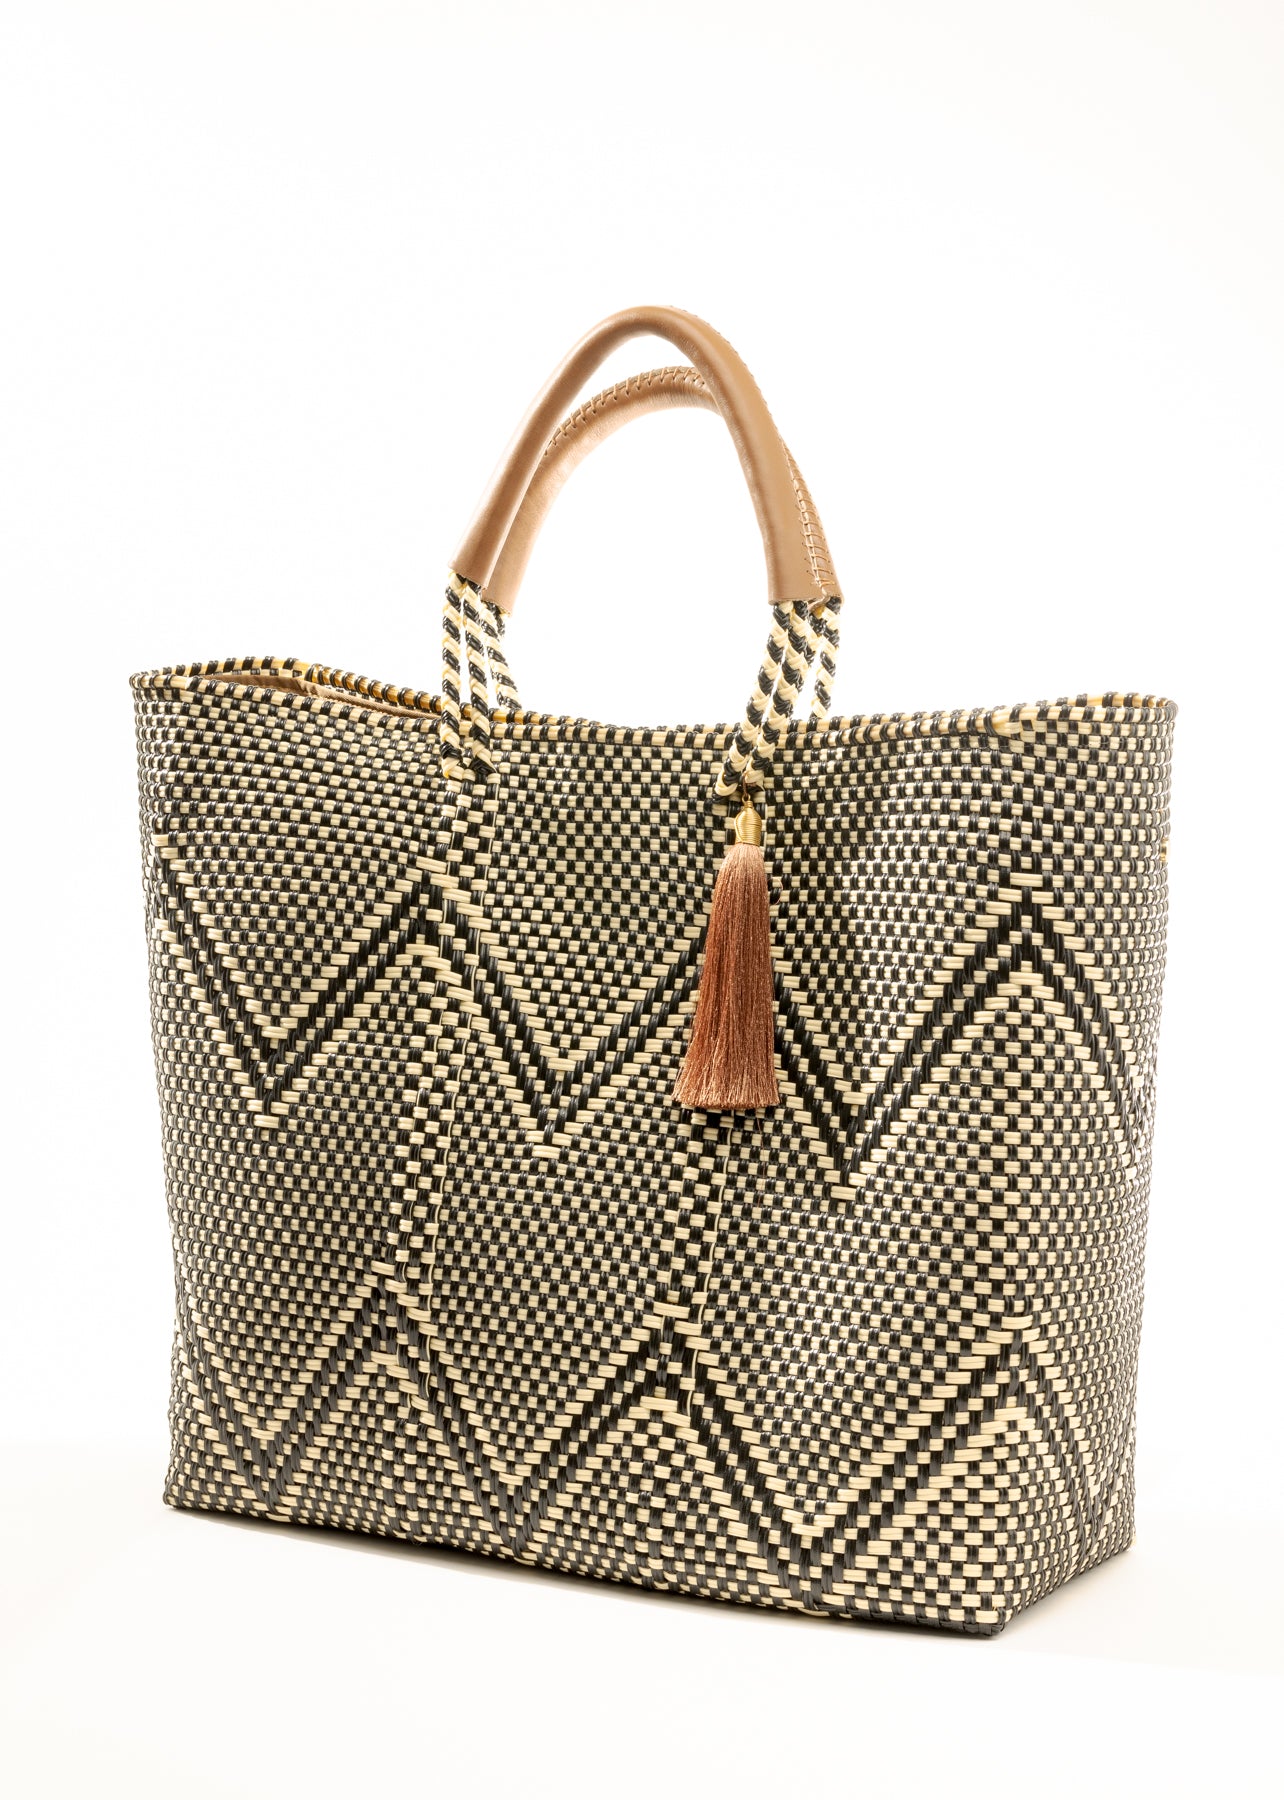 Angle view of a tan, cream, and brown chevron tote bag made from recycled plastics featuring a tan leather handle and tassel detail